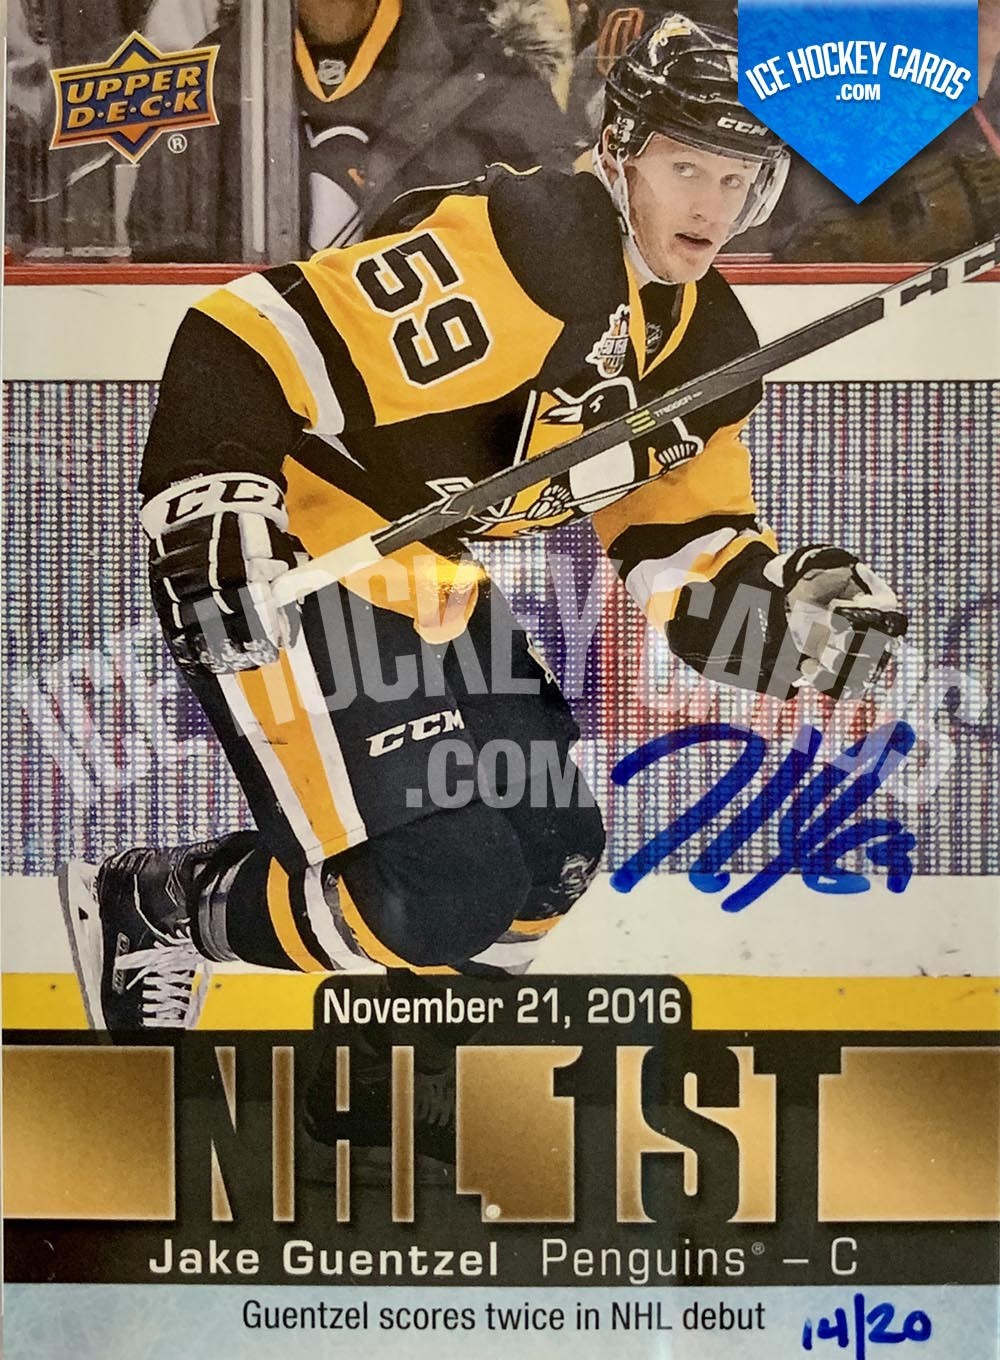 Upper Deck - Buybacks 2019-20 - Jake Guentzel 2016-17 UD Series 2 NHL 1st Insert Autographed Rookie Card # to 20 RARE